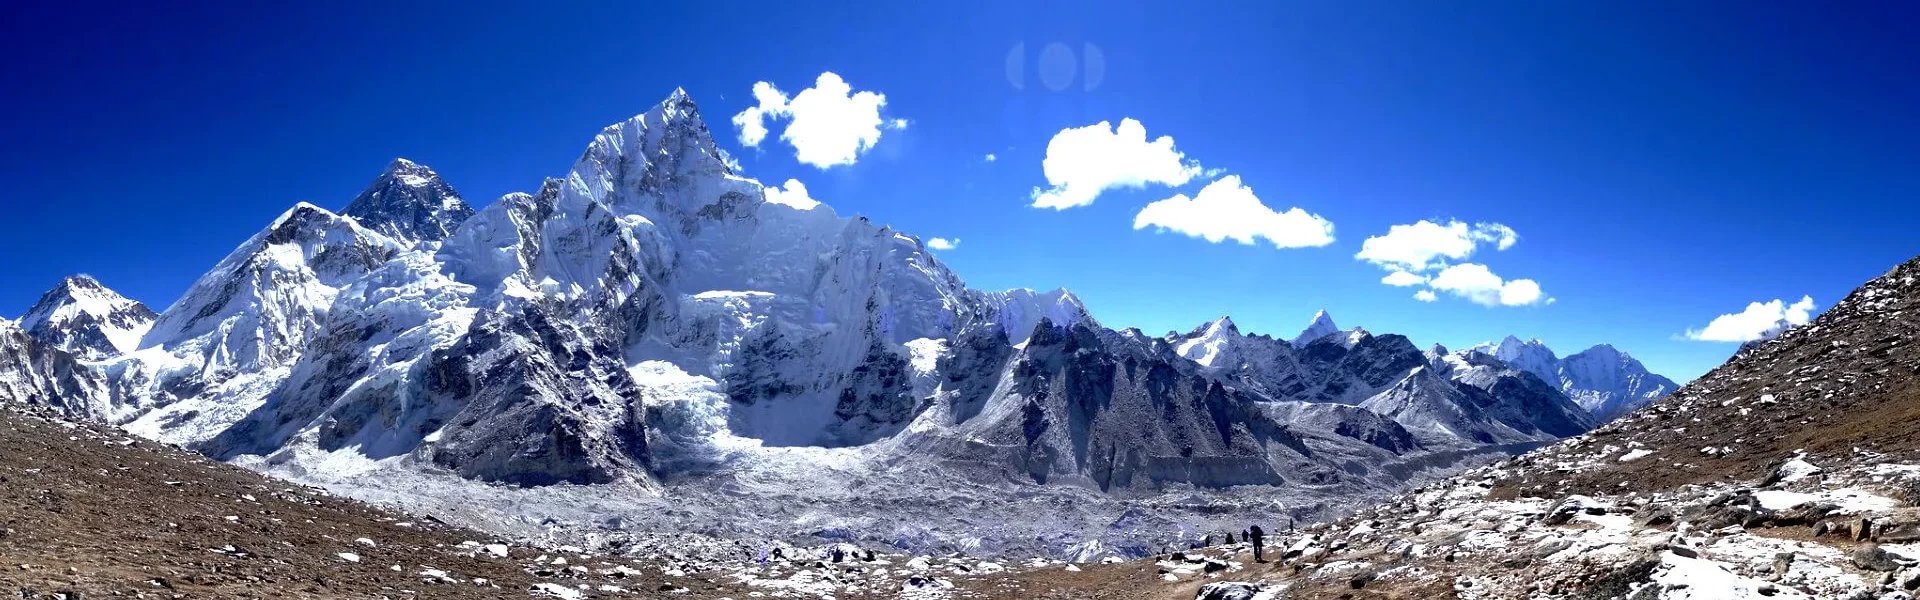 Everest base camp Trek difficulty, what makes the hike difficult?